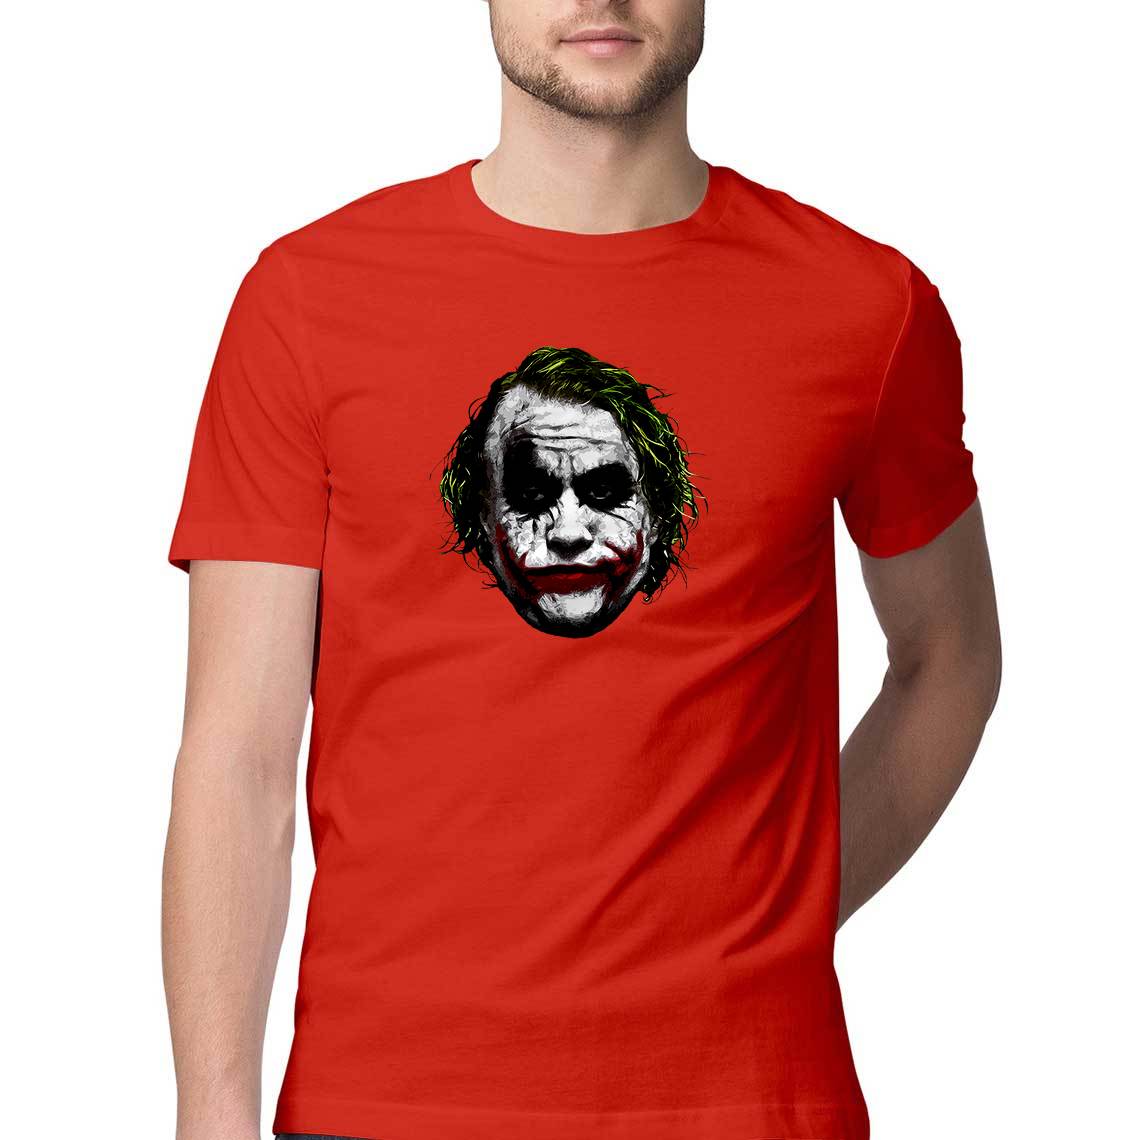 Why So Serious T-shirt